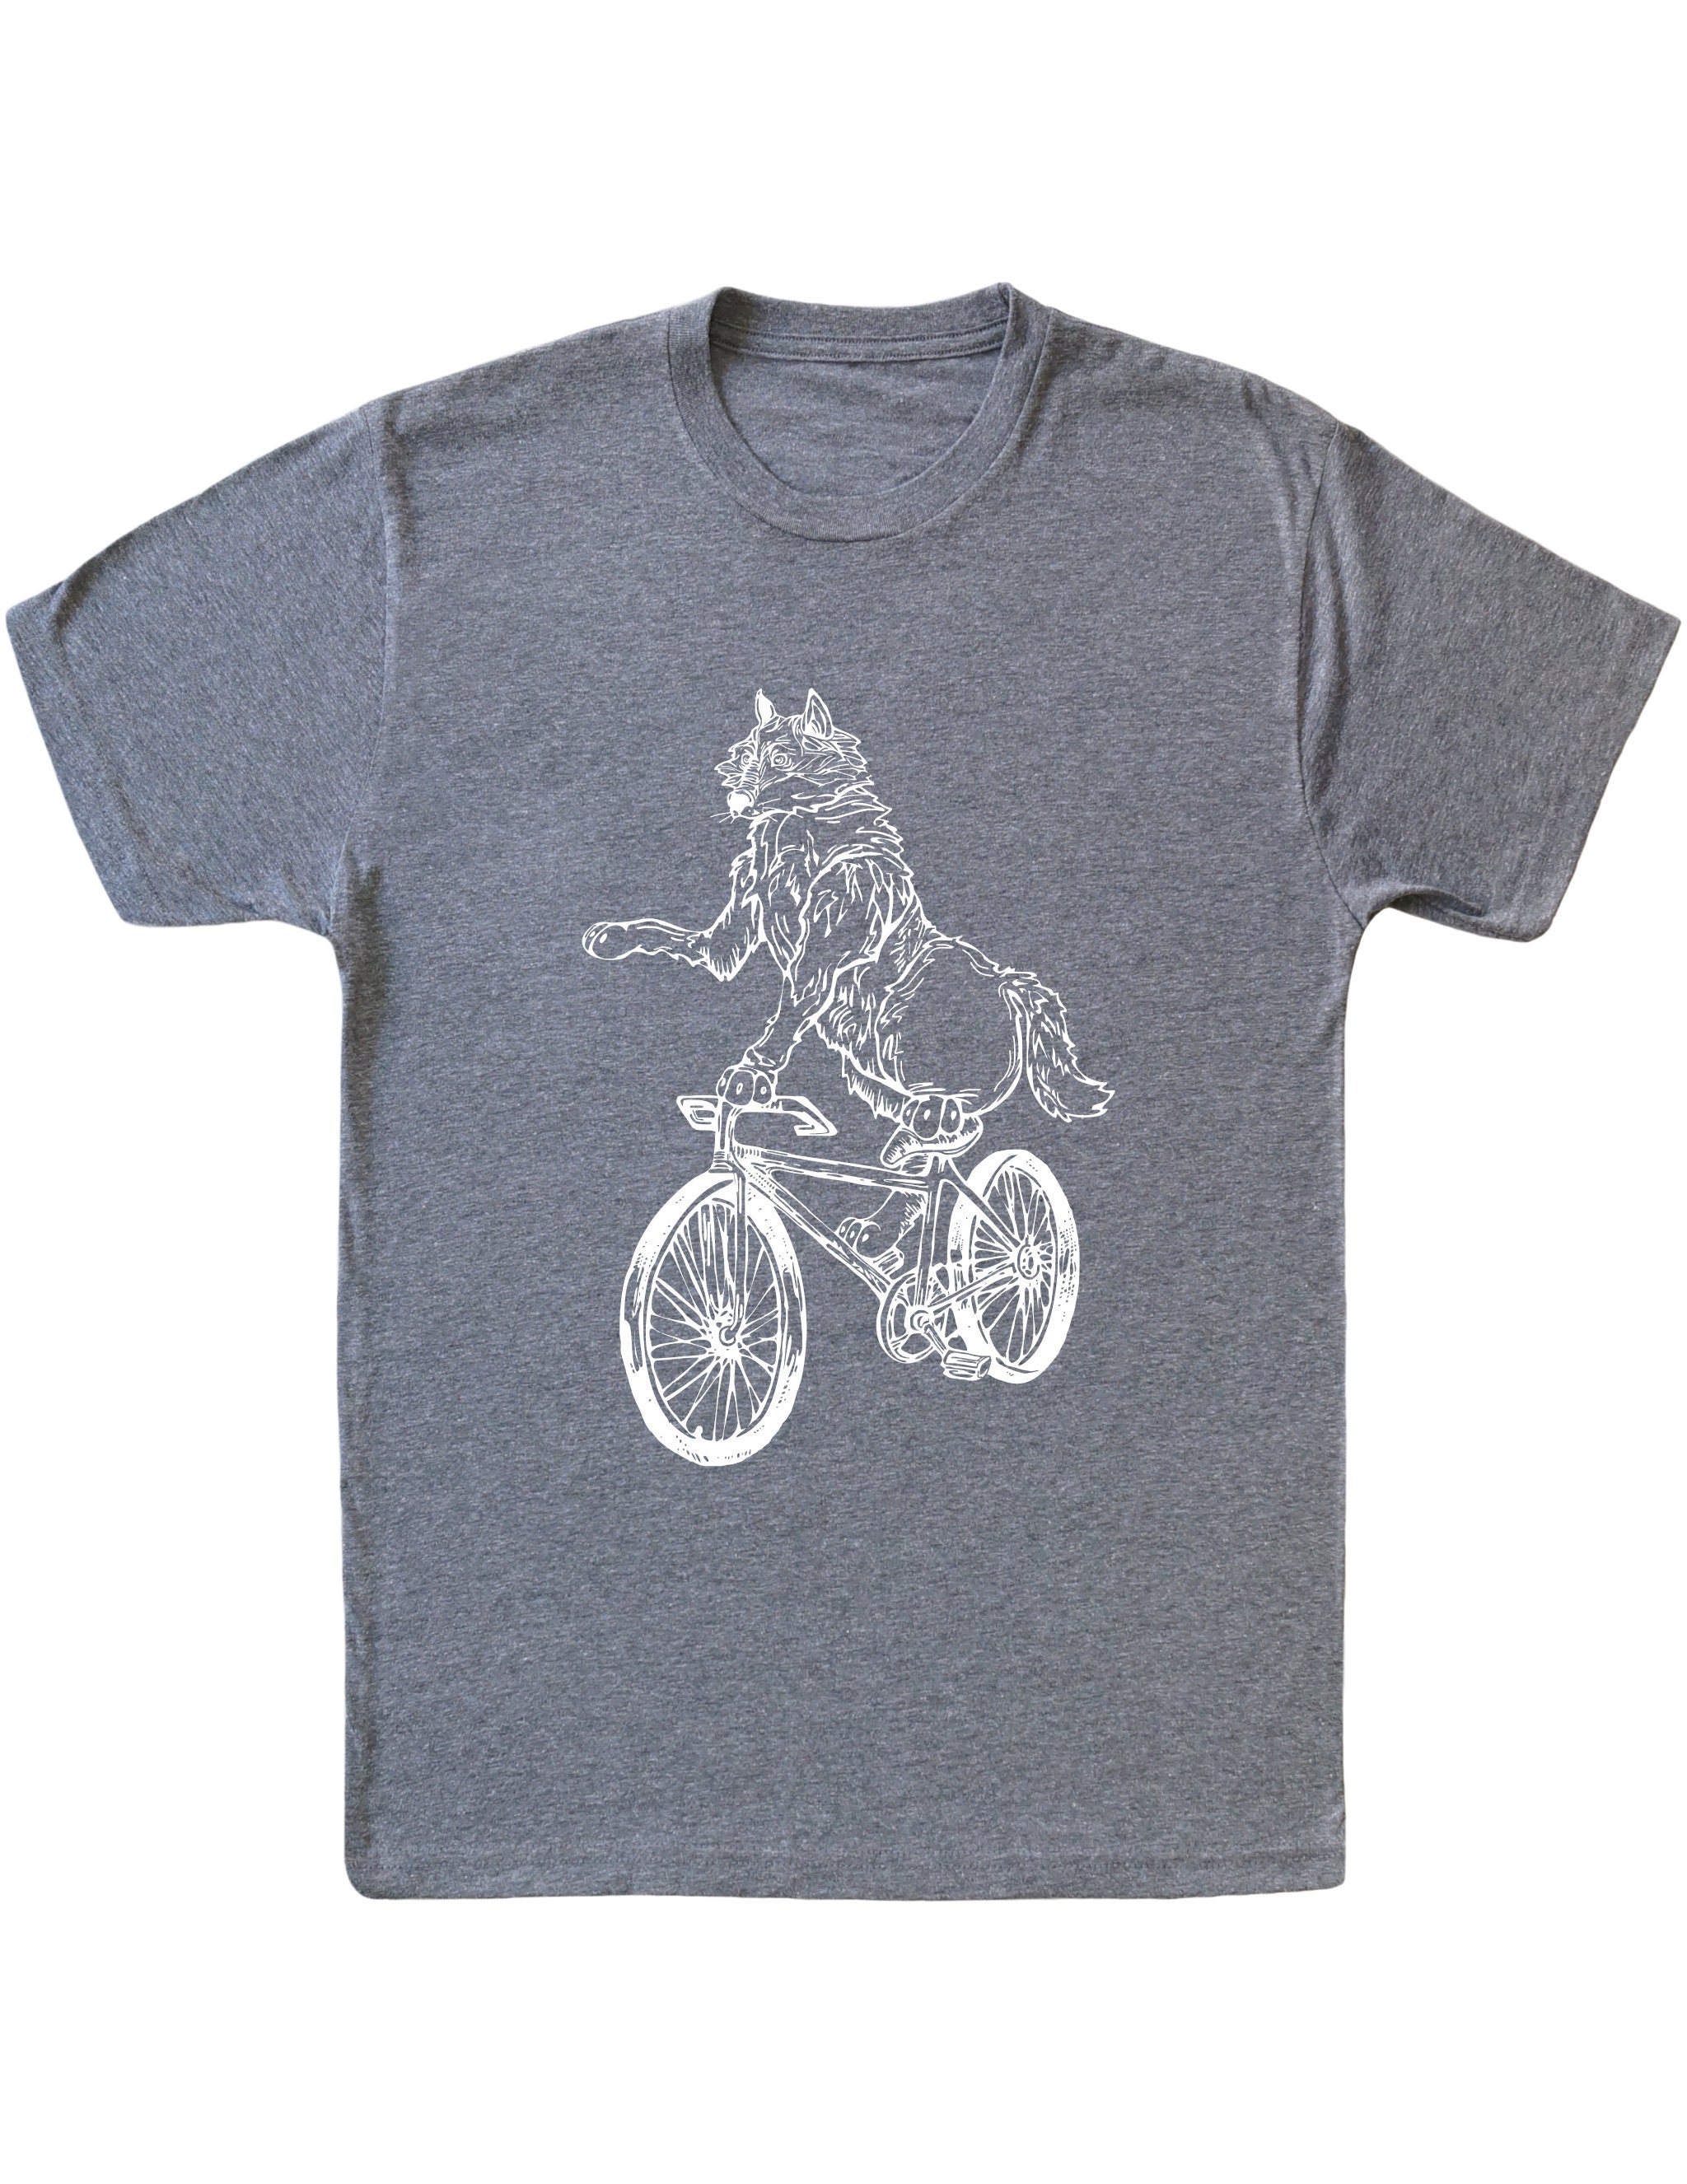 Wolf On A Bicycle Men's Tri-Blend T-Shirt Gift For Him, Boyfriend Birthday, Cycling Shirt Husband Gift, Cyclist Men Gifts Seembo